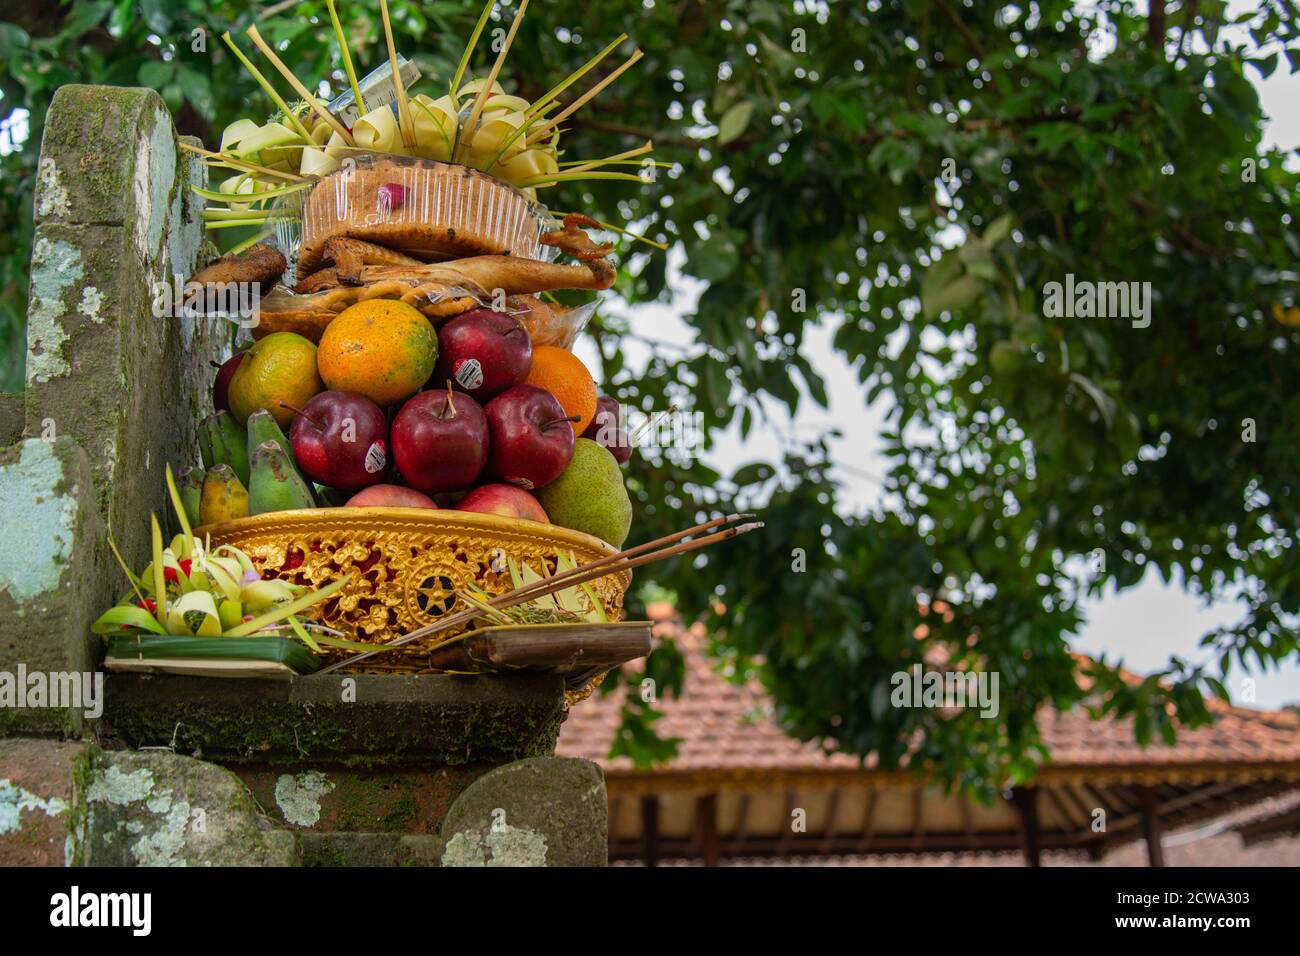 A colourful Balinese offering consist of fruits and cake that presented during a temple ceremony in Bali Indonesia Stock Photo